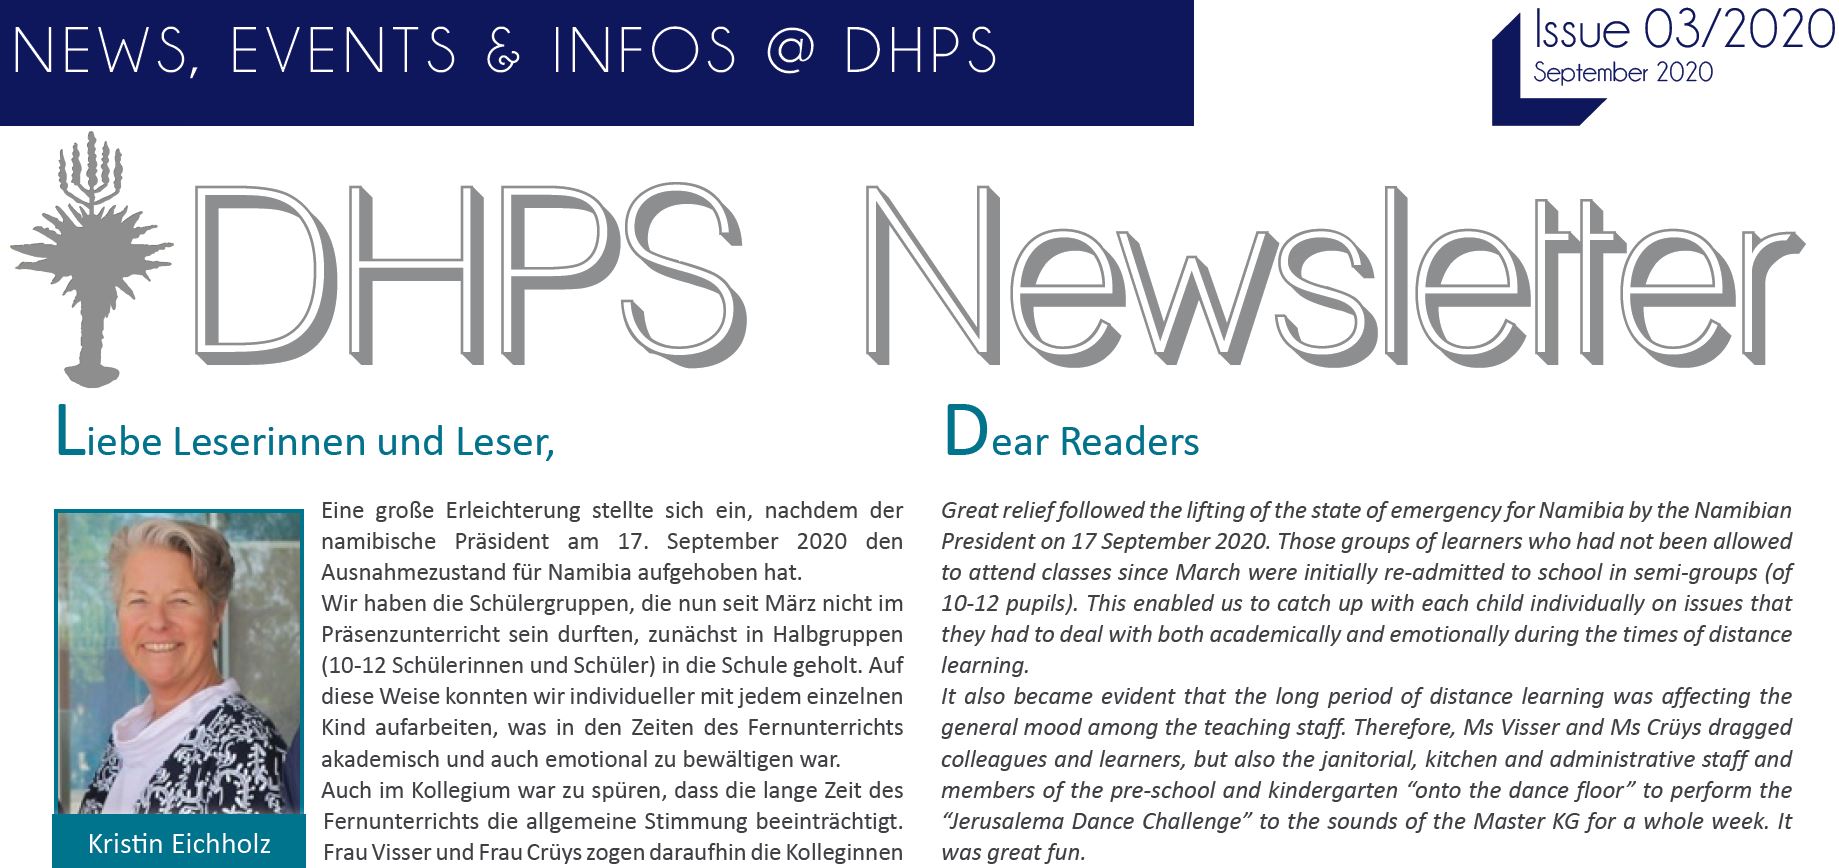 Latest Newsletter (September 2020) is out now!